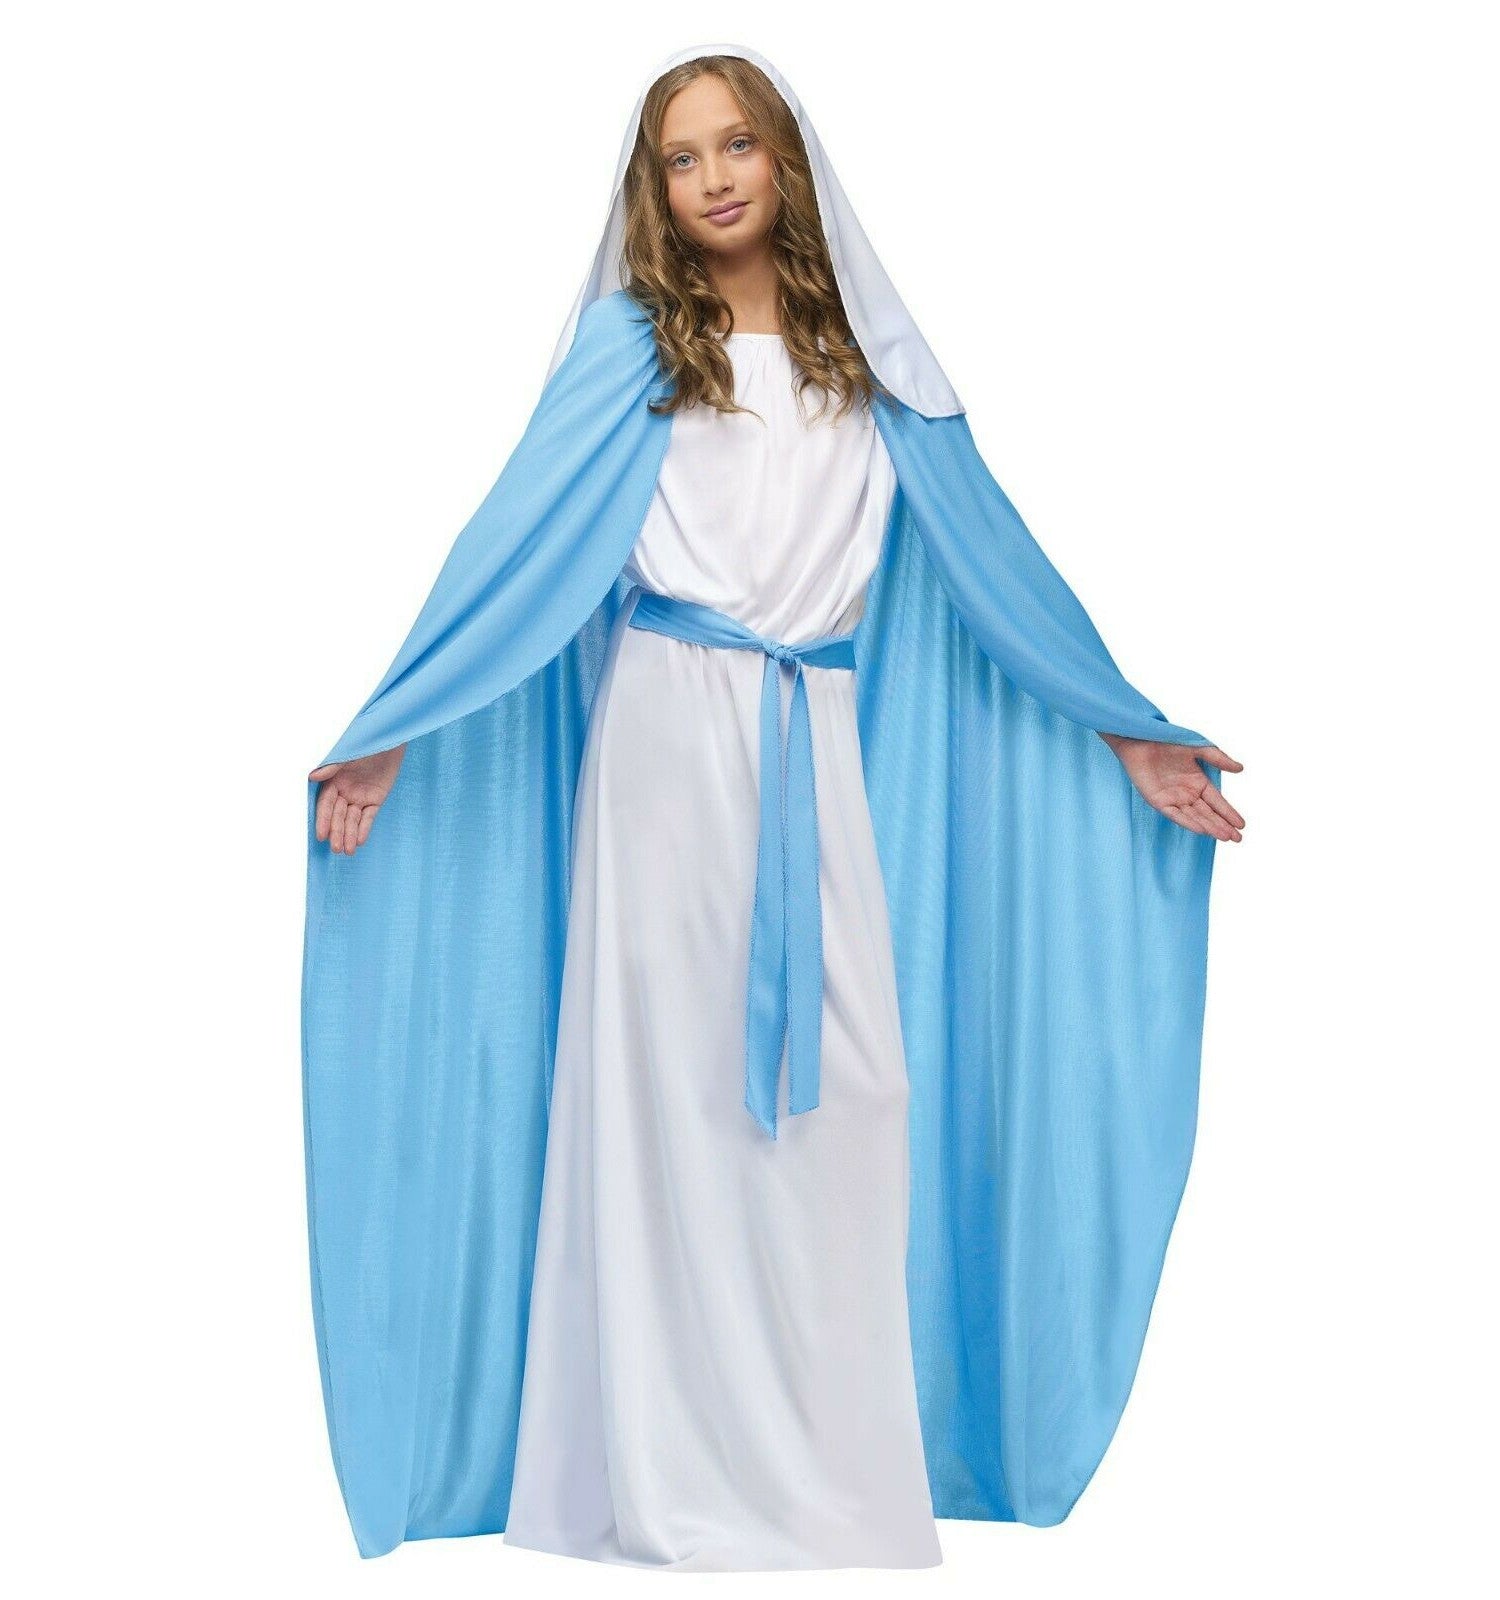 Biblical Virgin Mary Religious Christmas Child Costume White gown with attached blue belt and cloak Veil with hair comb